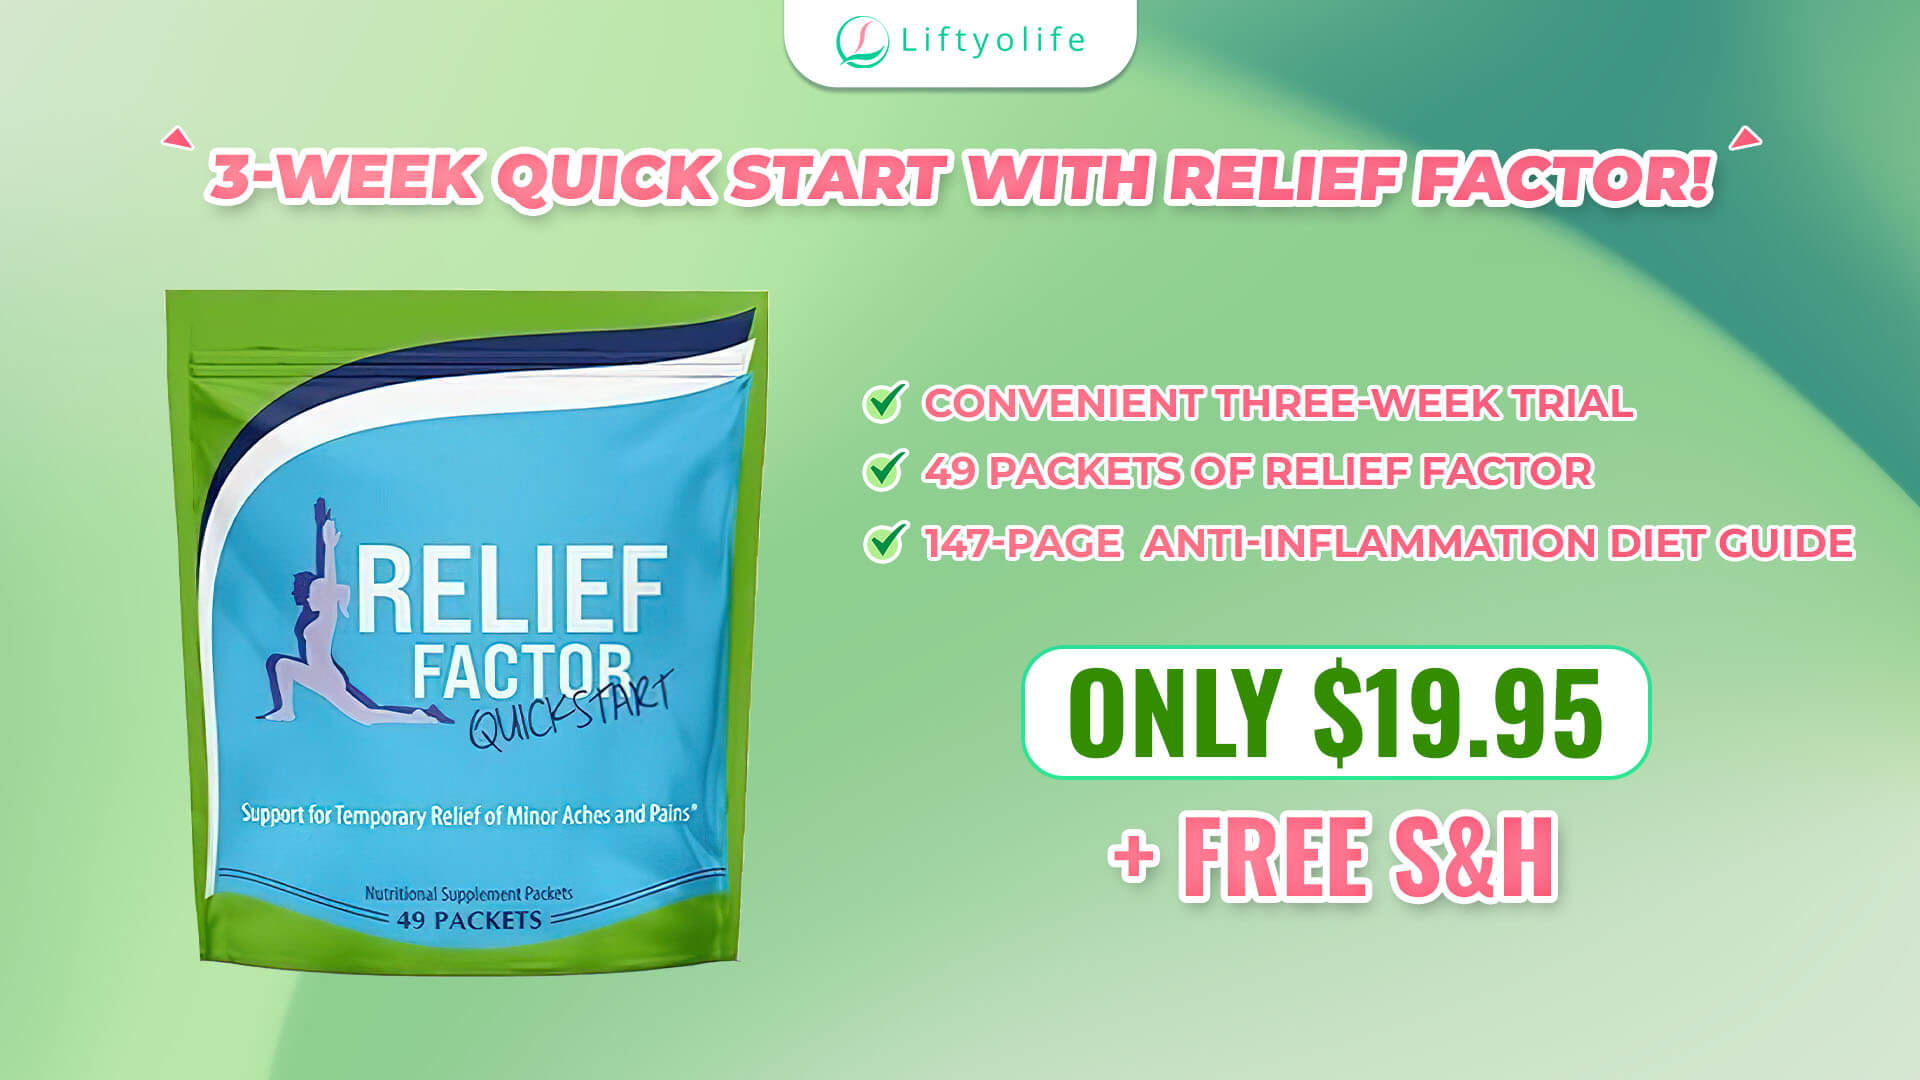 How Much Does Relief Factor Cost